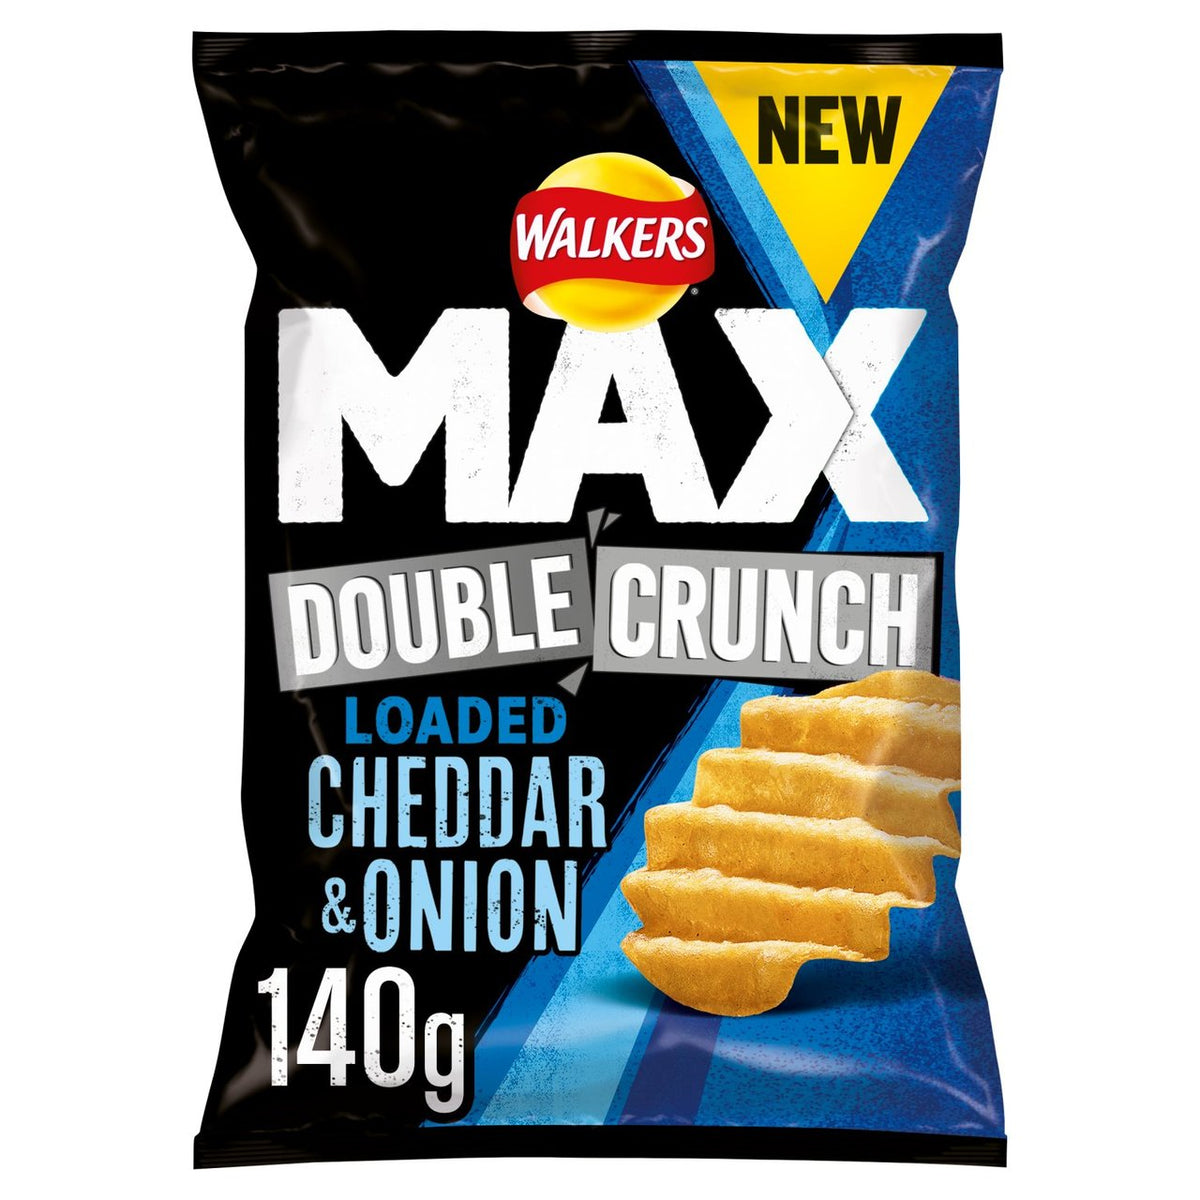 Walkers Double Crunch Cheddar and Onion